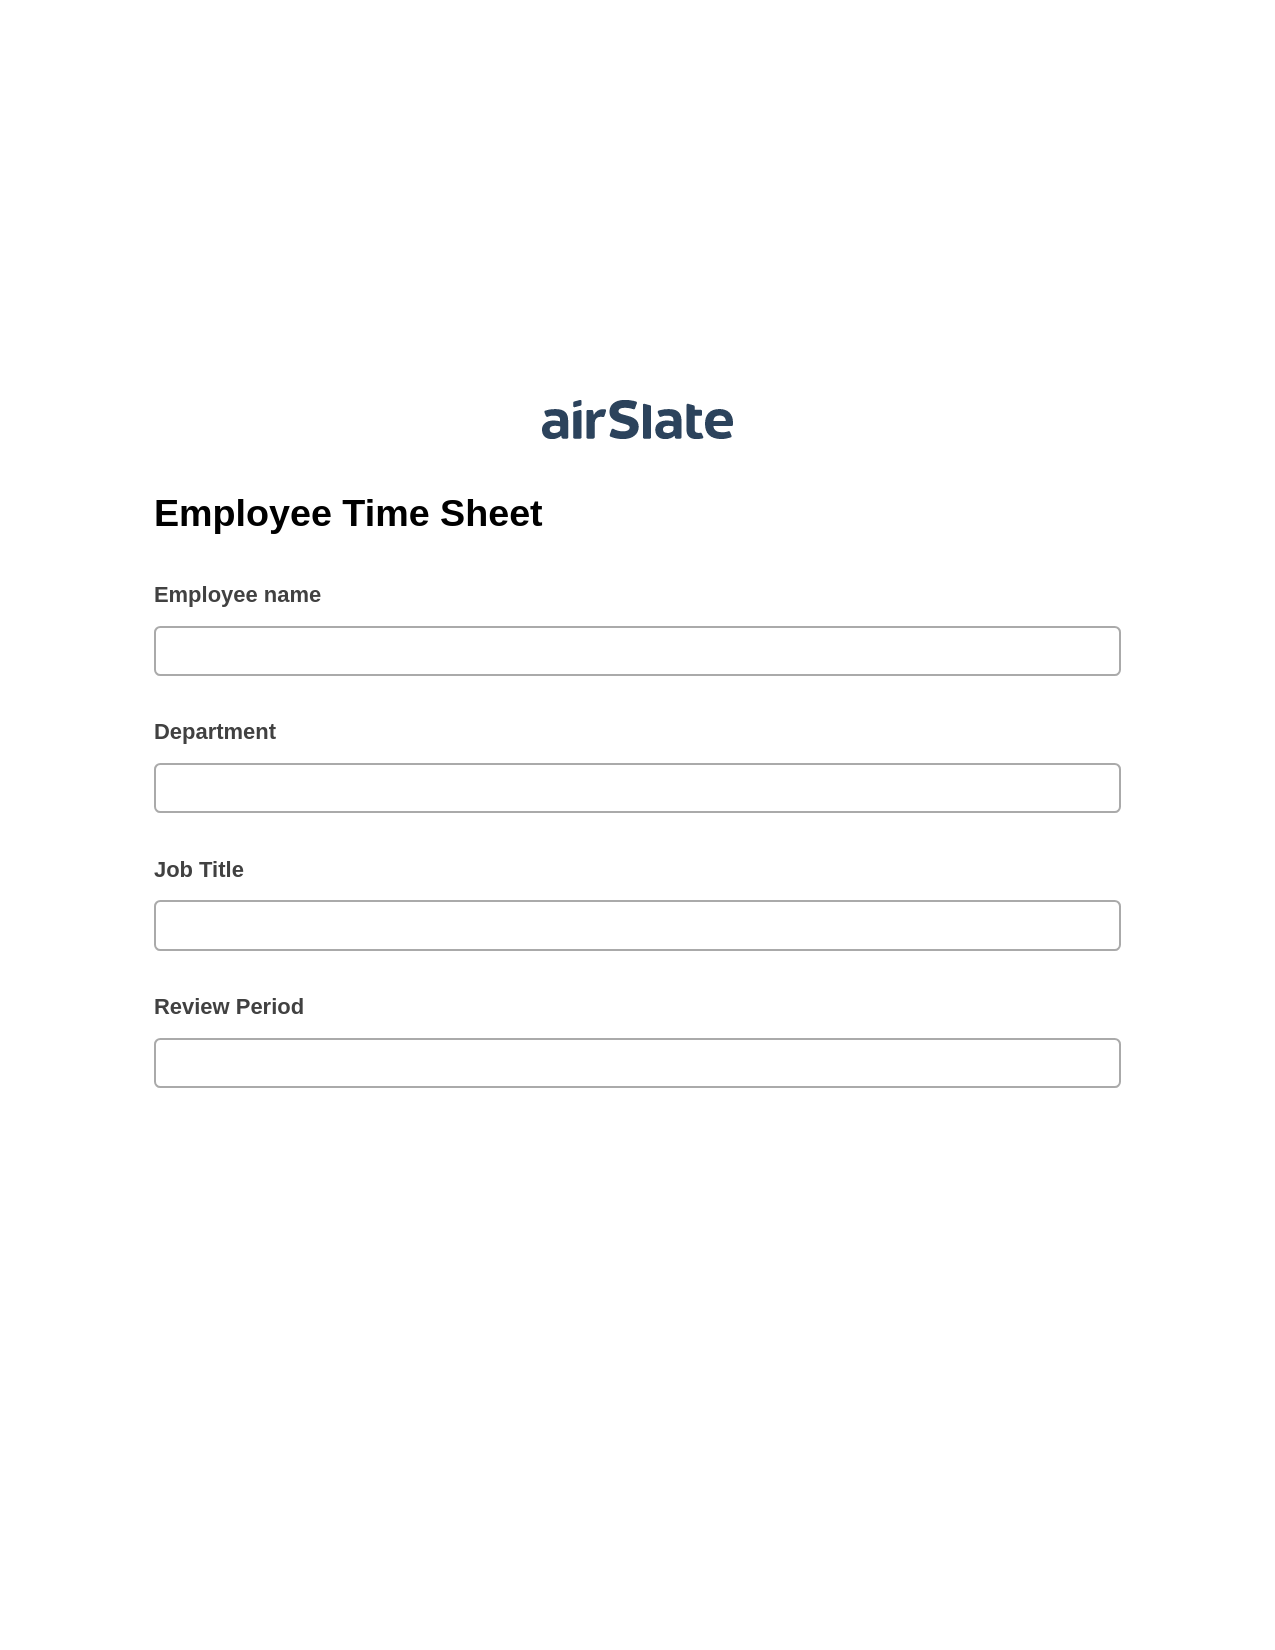 Employee Time Sheet Pre-fill from Excel Spreadsheet Bot, Lock the Slate Bot, Export to NetSuite Bot